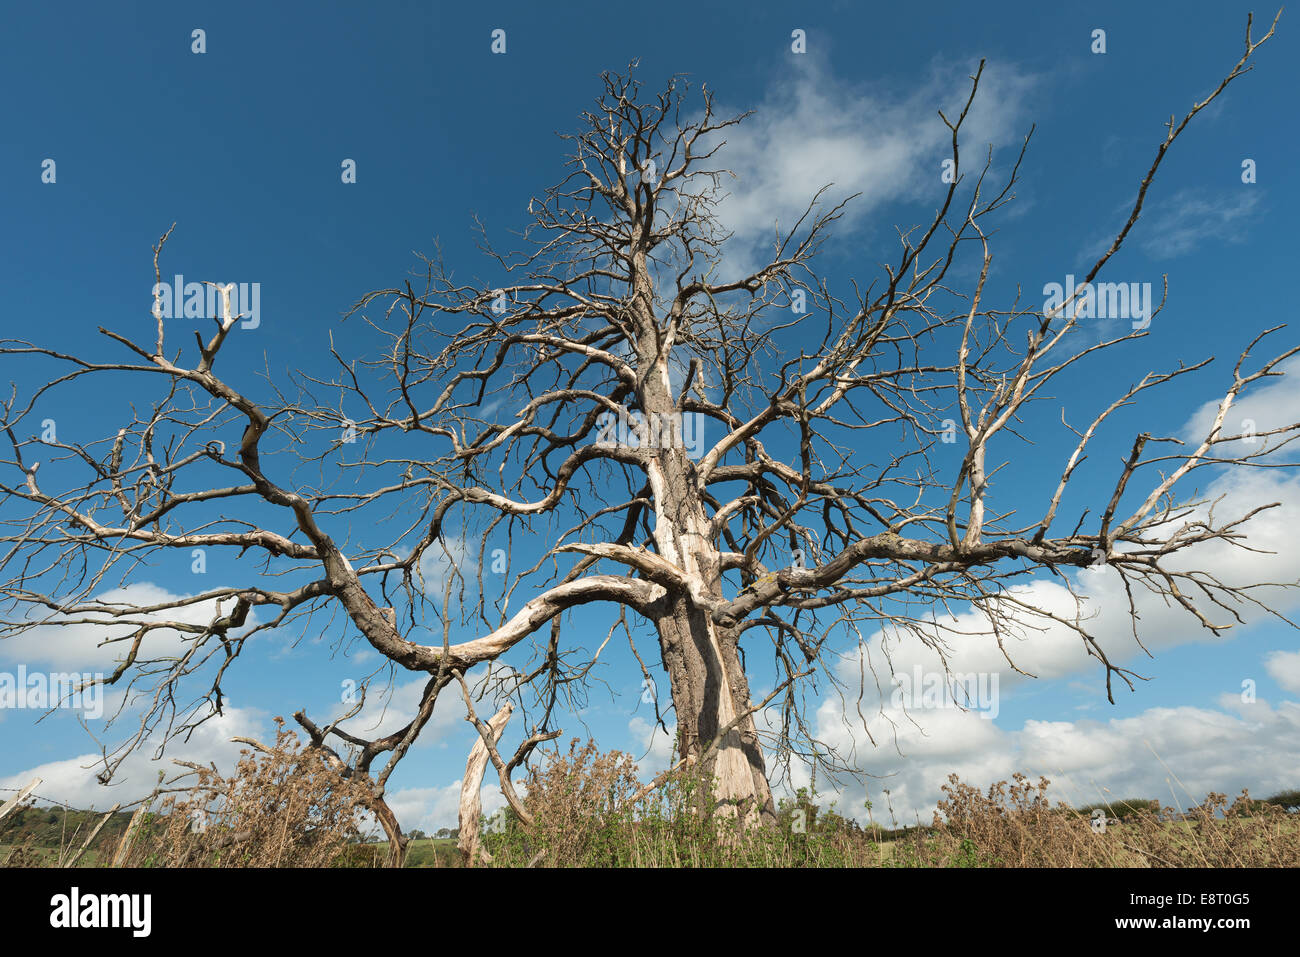 Mature horse chestnut that has died and is still standing in open fields against backdrop of north downs and blue sky Stock Photo